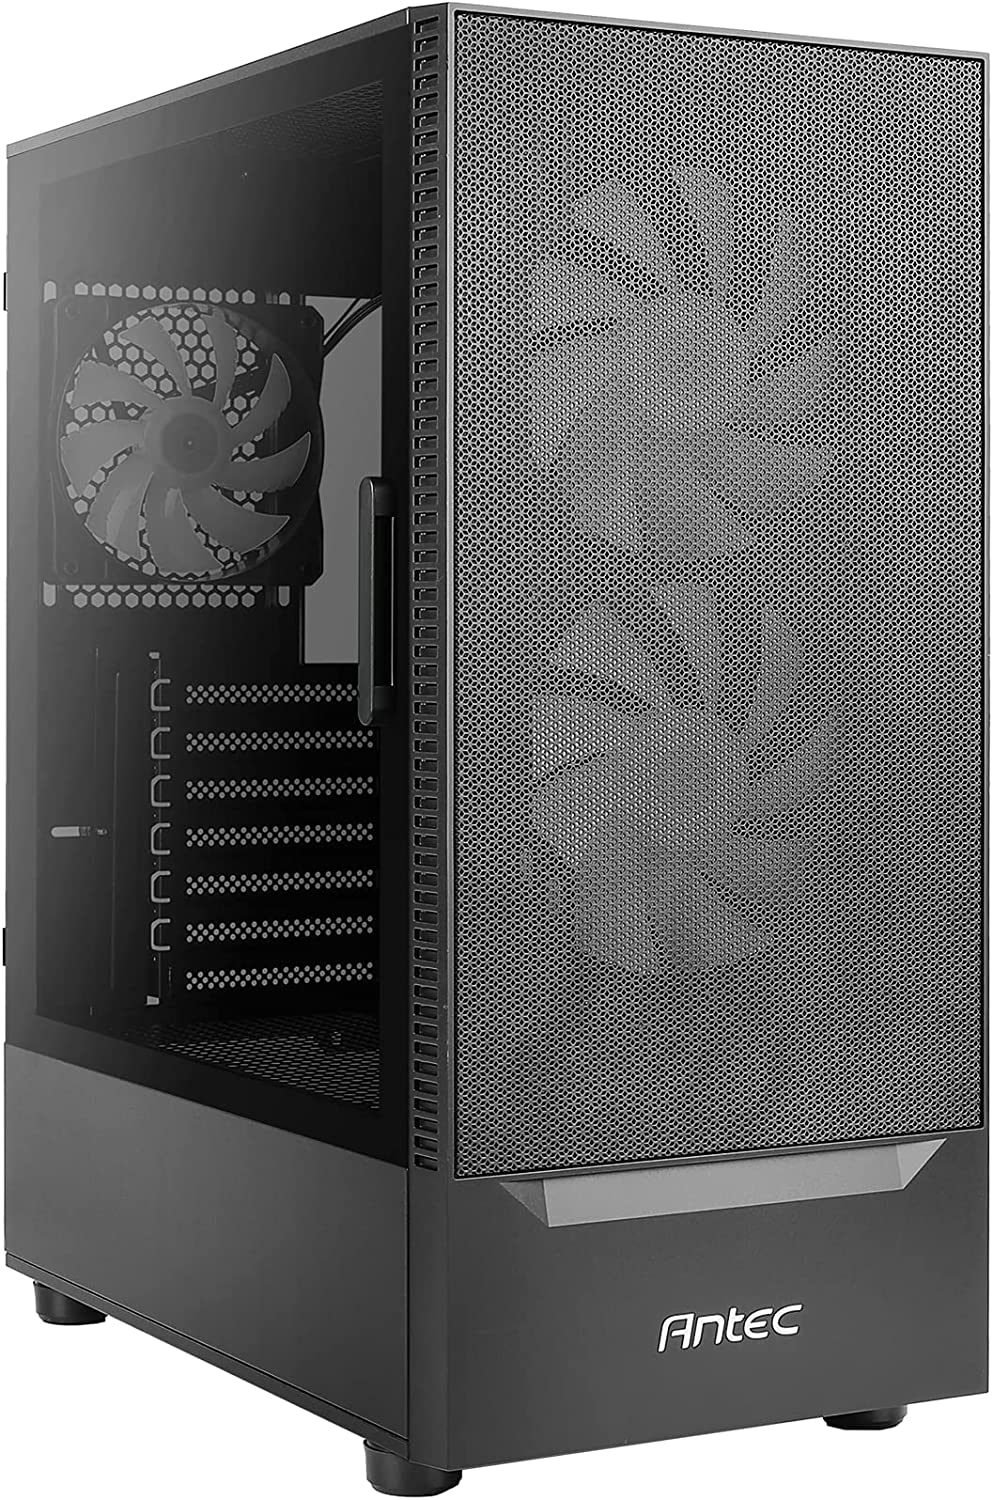 Antec NX410 ATX Mid-Tower Case, Tempered Glass Side Panel, Full Side View, Pre-Installed 2 X 140Mm in Front & 1 X 120 Mm RGB Fans in Rear, Black (9734087000)